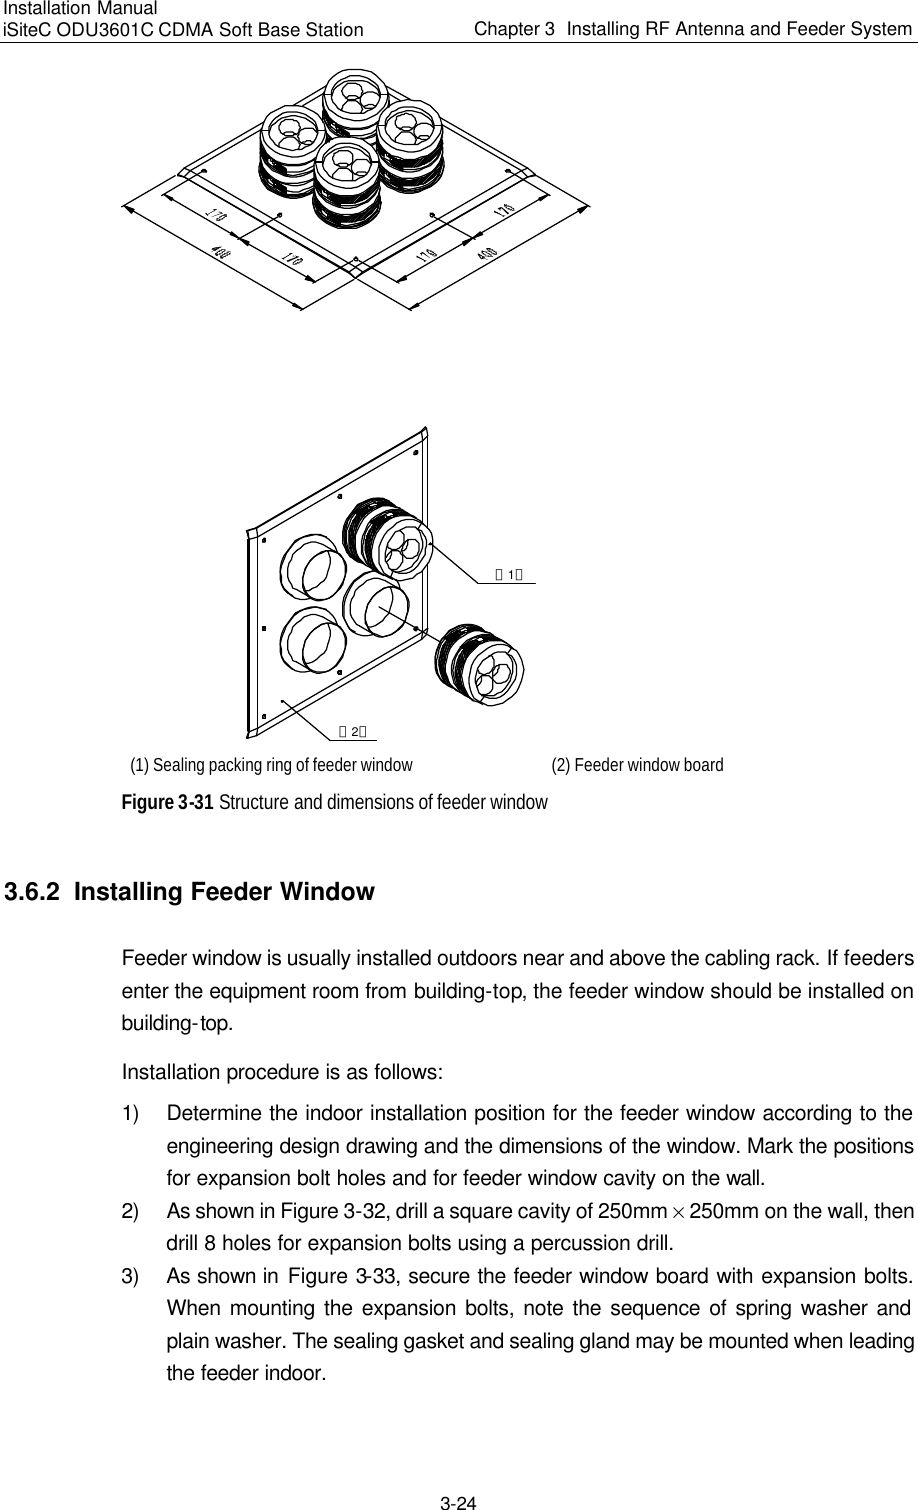 Installation Manual   iSiteC ODU3601C CDMA Soft Base Station Chapter 3  Installing RF Antenna and Feeder System  3-24 （1）（2） (1) Sealing packing ring of feeder window (2) Feeder window board Figure 3-31 Structure and dimensions of feeder window 3.6.2  Installing Feeder Window Feeder window is usually installed outdoors near and above the cabling rack. If feeders enter the equipment room from building-top, the feeder window should be installed on building-top. Installation procedure is as follows: 1) Determine the indoor installation position for the feeder window according to the engineering design drawing and the dimensions of the window. Mark the positions for expansion bolt holes and for feeder window cavity on the wall. 2) As shown in Figure 3-32, drill a square cavity of 250mm % 250mm on the wall, then drill 8 holes for expansion bolts using a percussion drill. 3) As shown in Figure 3-33, secure the feeder window board with expansion bolts. When mounting the expansion bolts, note the sequence of spring washer and plain washer. The sealing gasket and sealing gland may be mounted when leading the feeder indoor. 